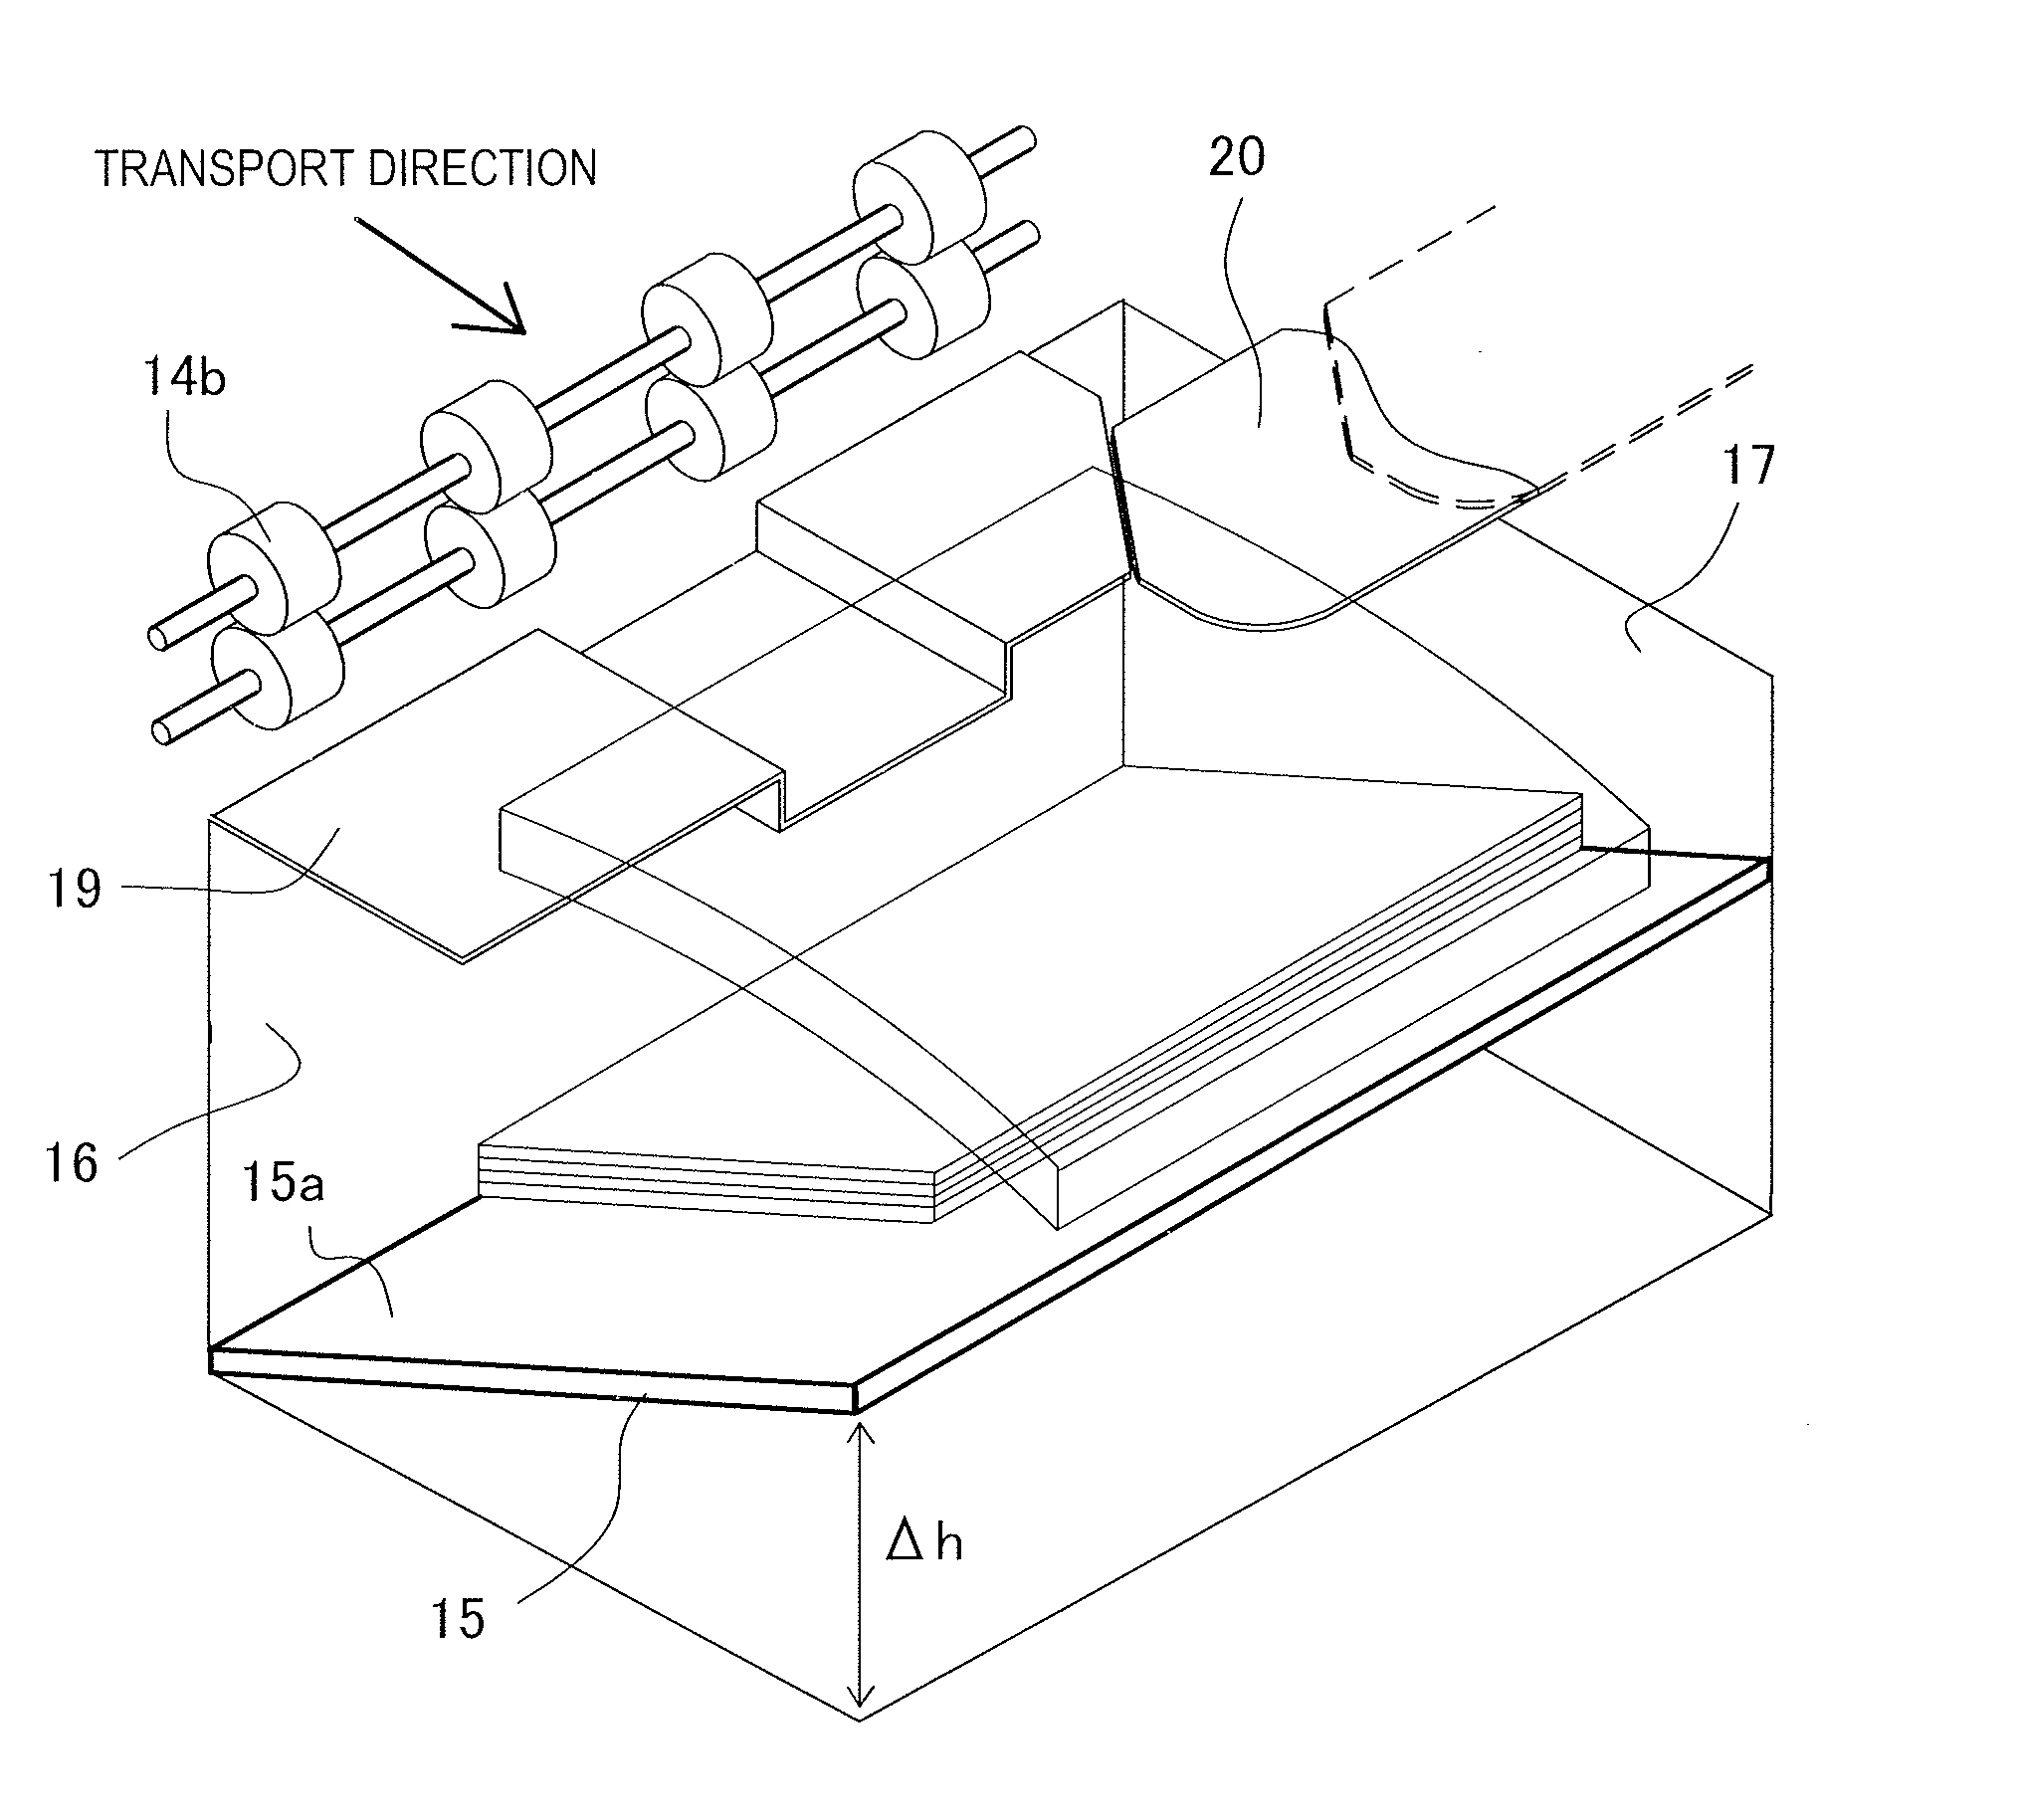 Sheet storage apparatus and image formation system using the apparatus